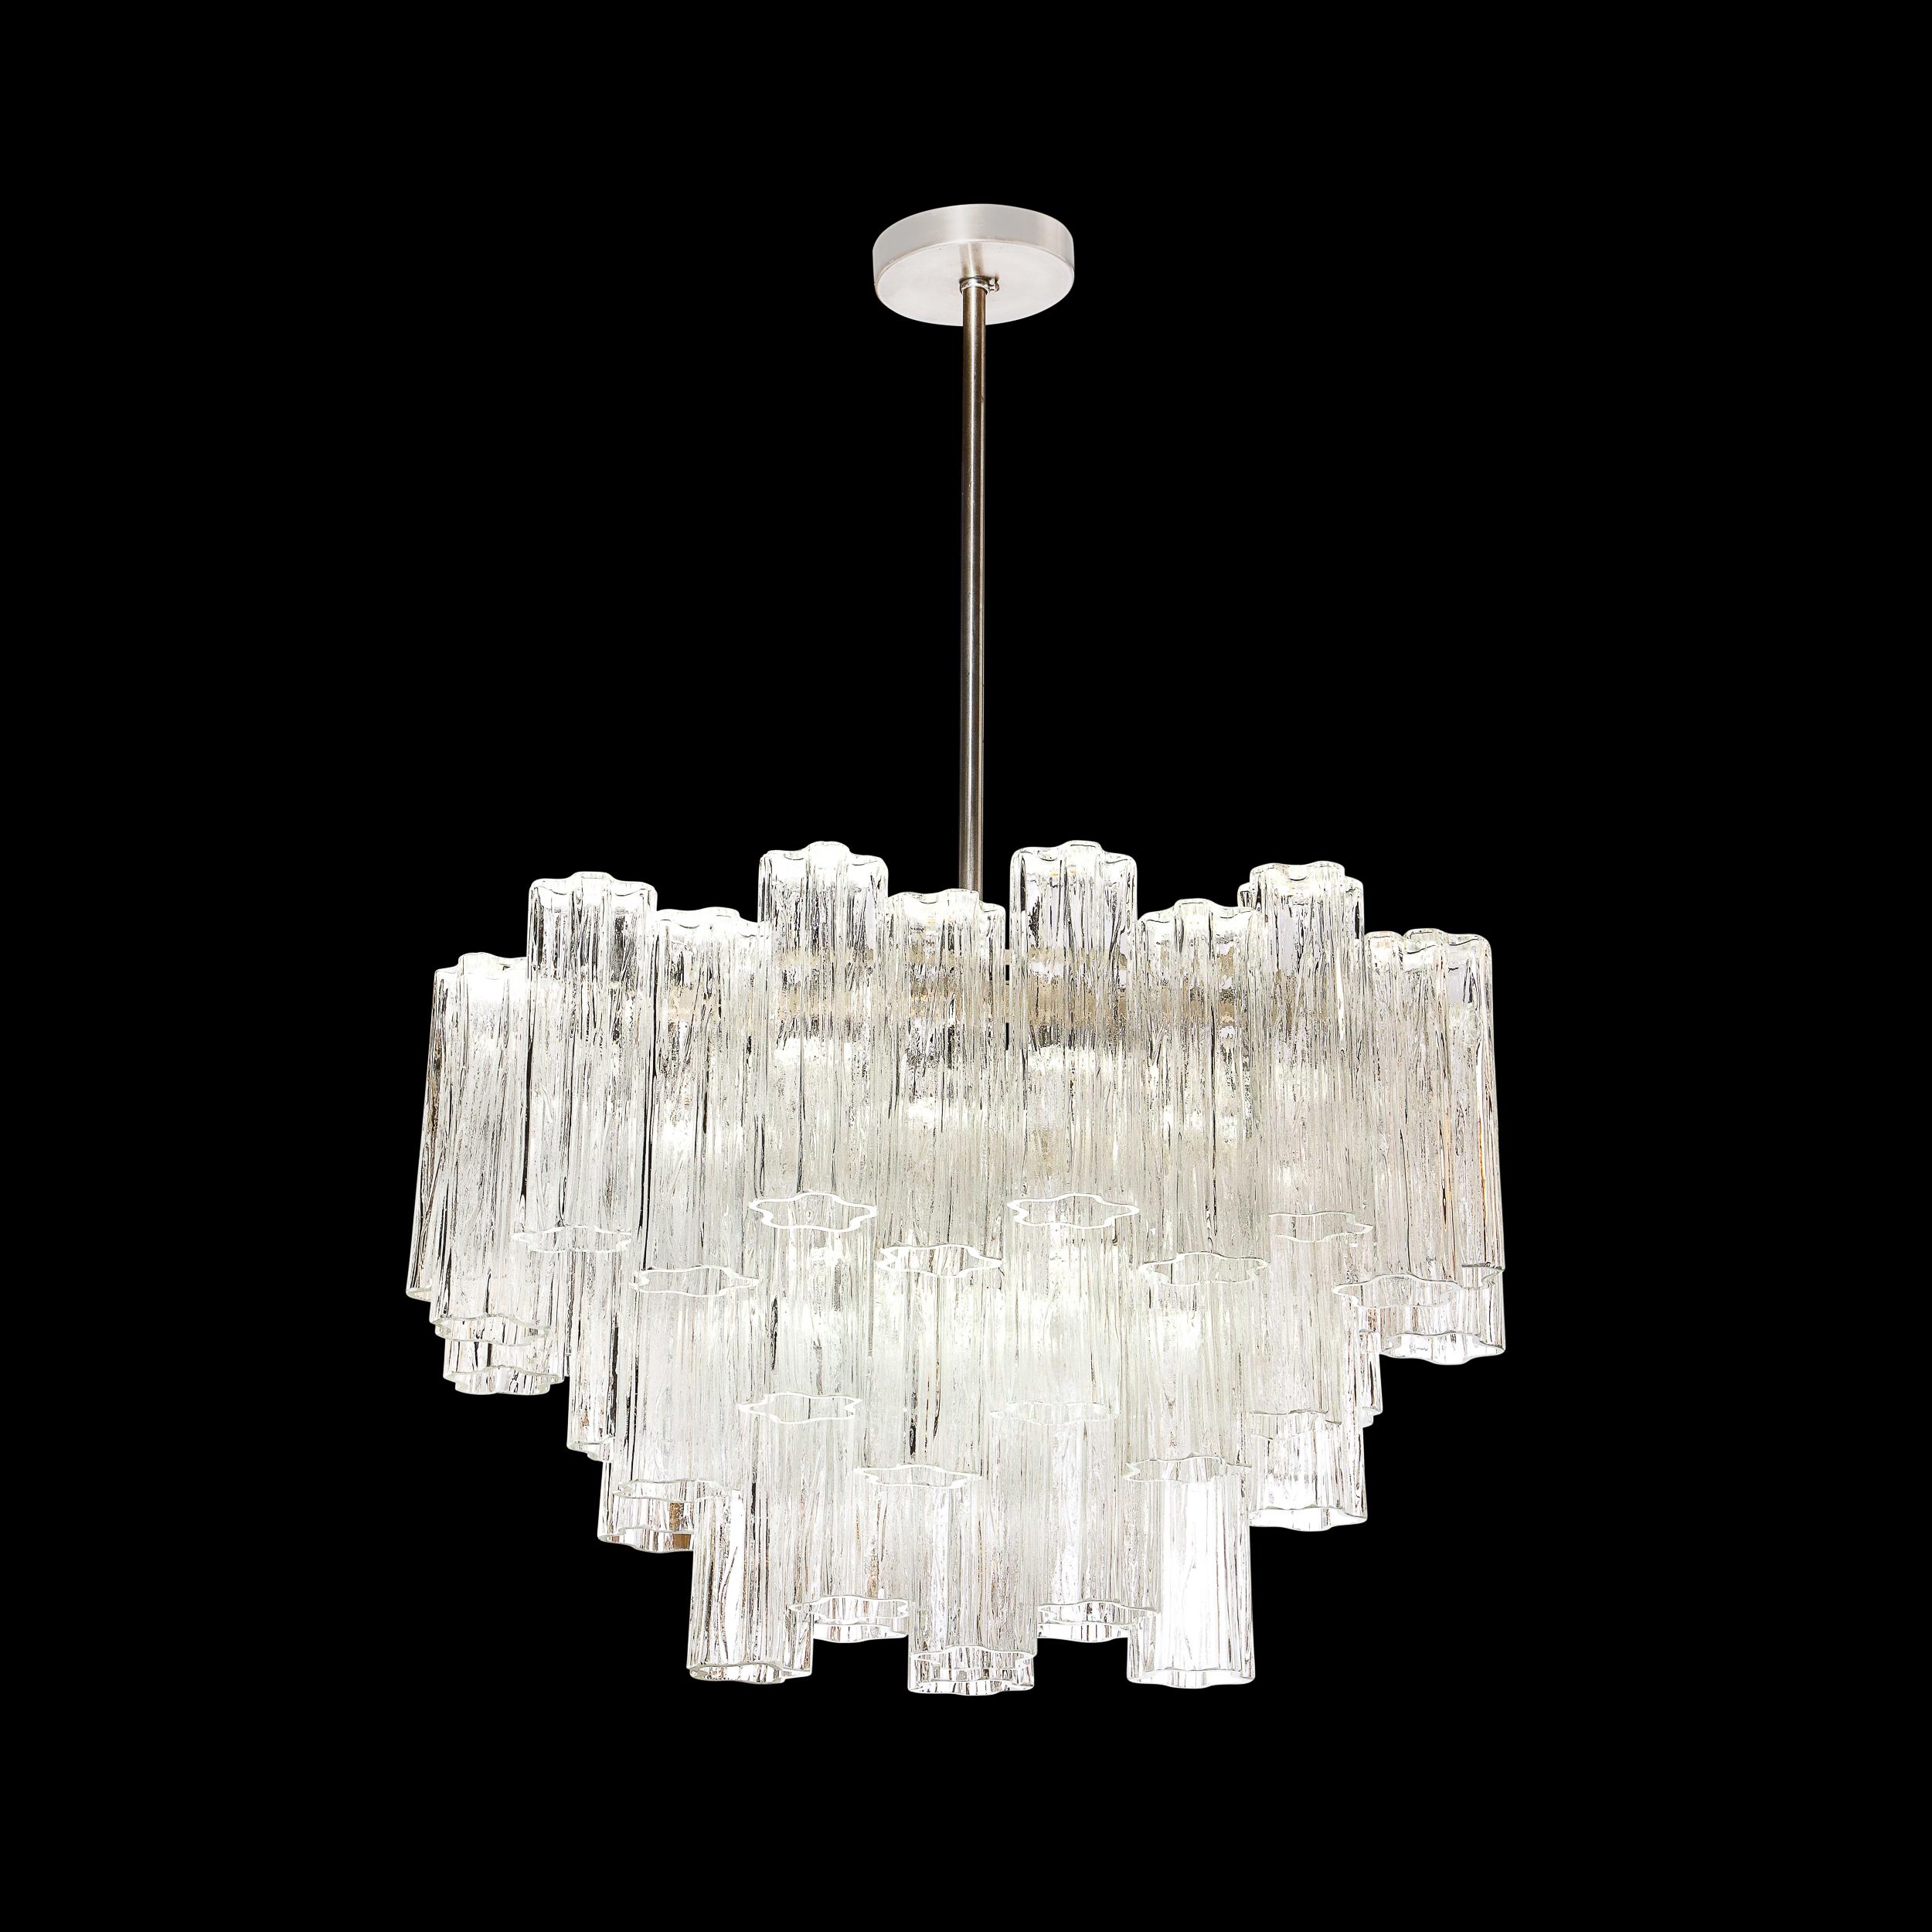 This elegant and graphic Mid-Century Modern chandelier was realized in Murano, Italy- the island off the coast of Murano renowned for centuries for its superlative glass production- circa 1970. It features an racetrack drum form consisting of three